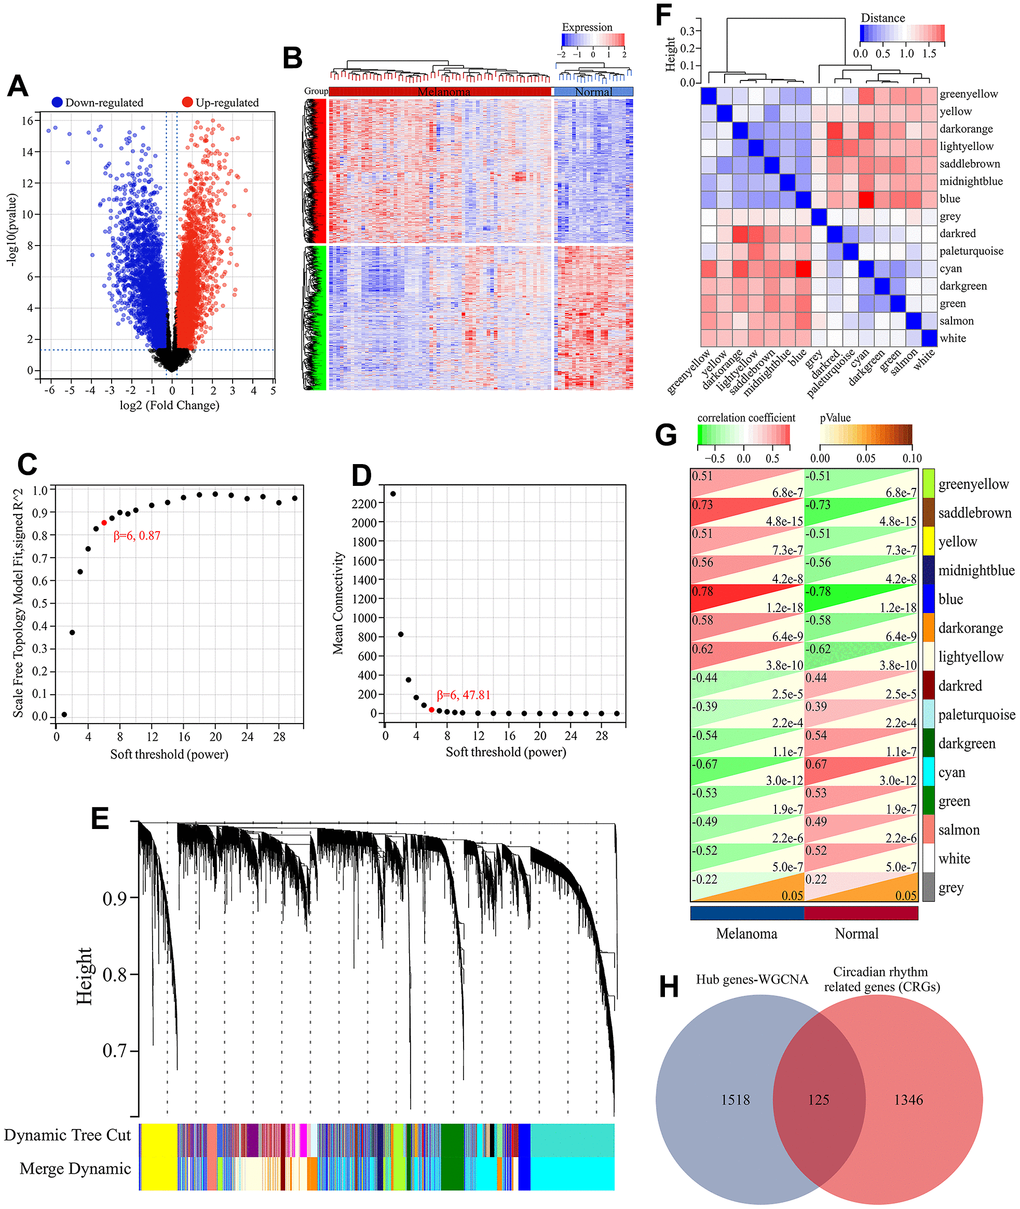 Screening of melanoma-related CRGs. (A) Volcano plot of differential expression analysis. (B) Heatmap of differential expressed genes. (C) Relationship between scale-free topology and soft thresholding power. (D) Average connectivity’s dependence on soft threshold power levels. (E) Hierarchical clustering dendrogram displaying distinct co-expression modules as individual colors. The bicolored rows beneath the tree indicate the initial and combined modules. (F) Cluster dendrogram of module eigengenes (MEs) and adjacency heatmap of MEs. (G) Correlation heatmap illustrating the association between module eigengenes (MEs) and clinical characteristics. (H) Screening of melanoma-related CRGs. The overlapping genes between hub genes in WGCNA and CRGs obtained from MSigDB database were defined as melanoma-related CRGs.